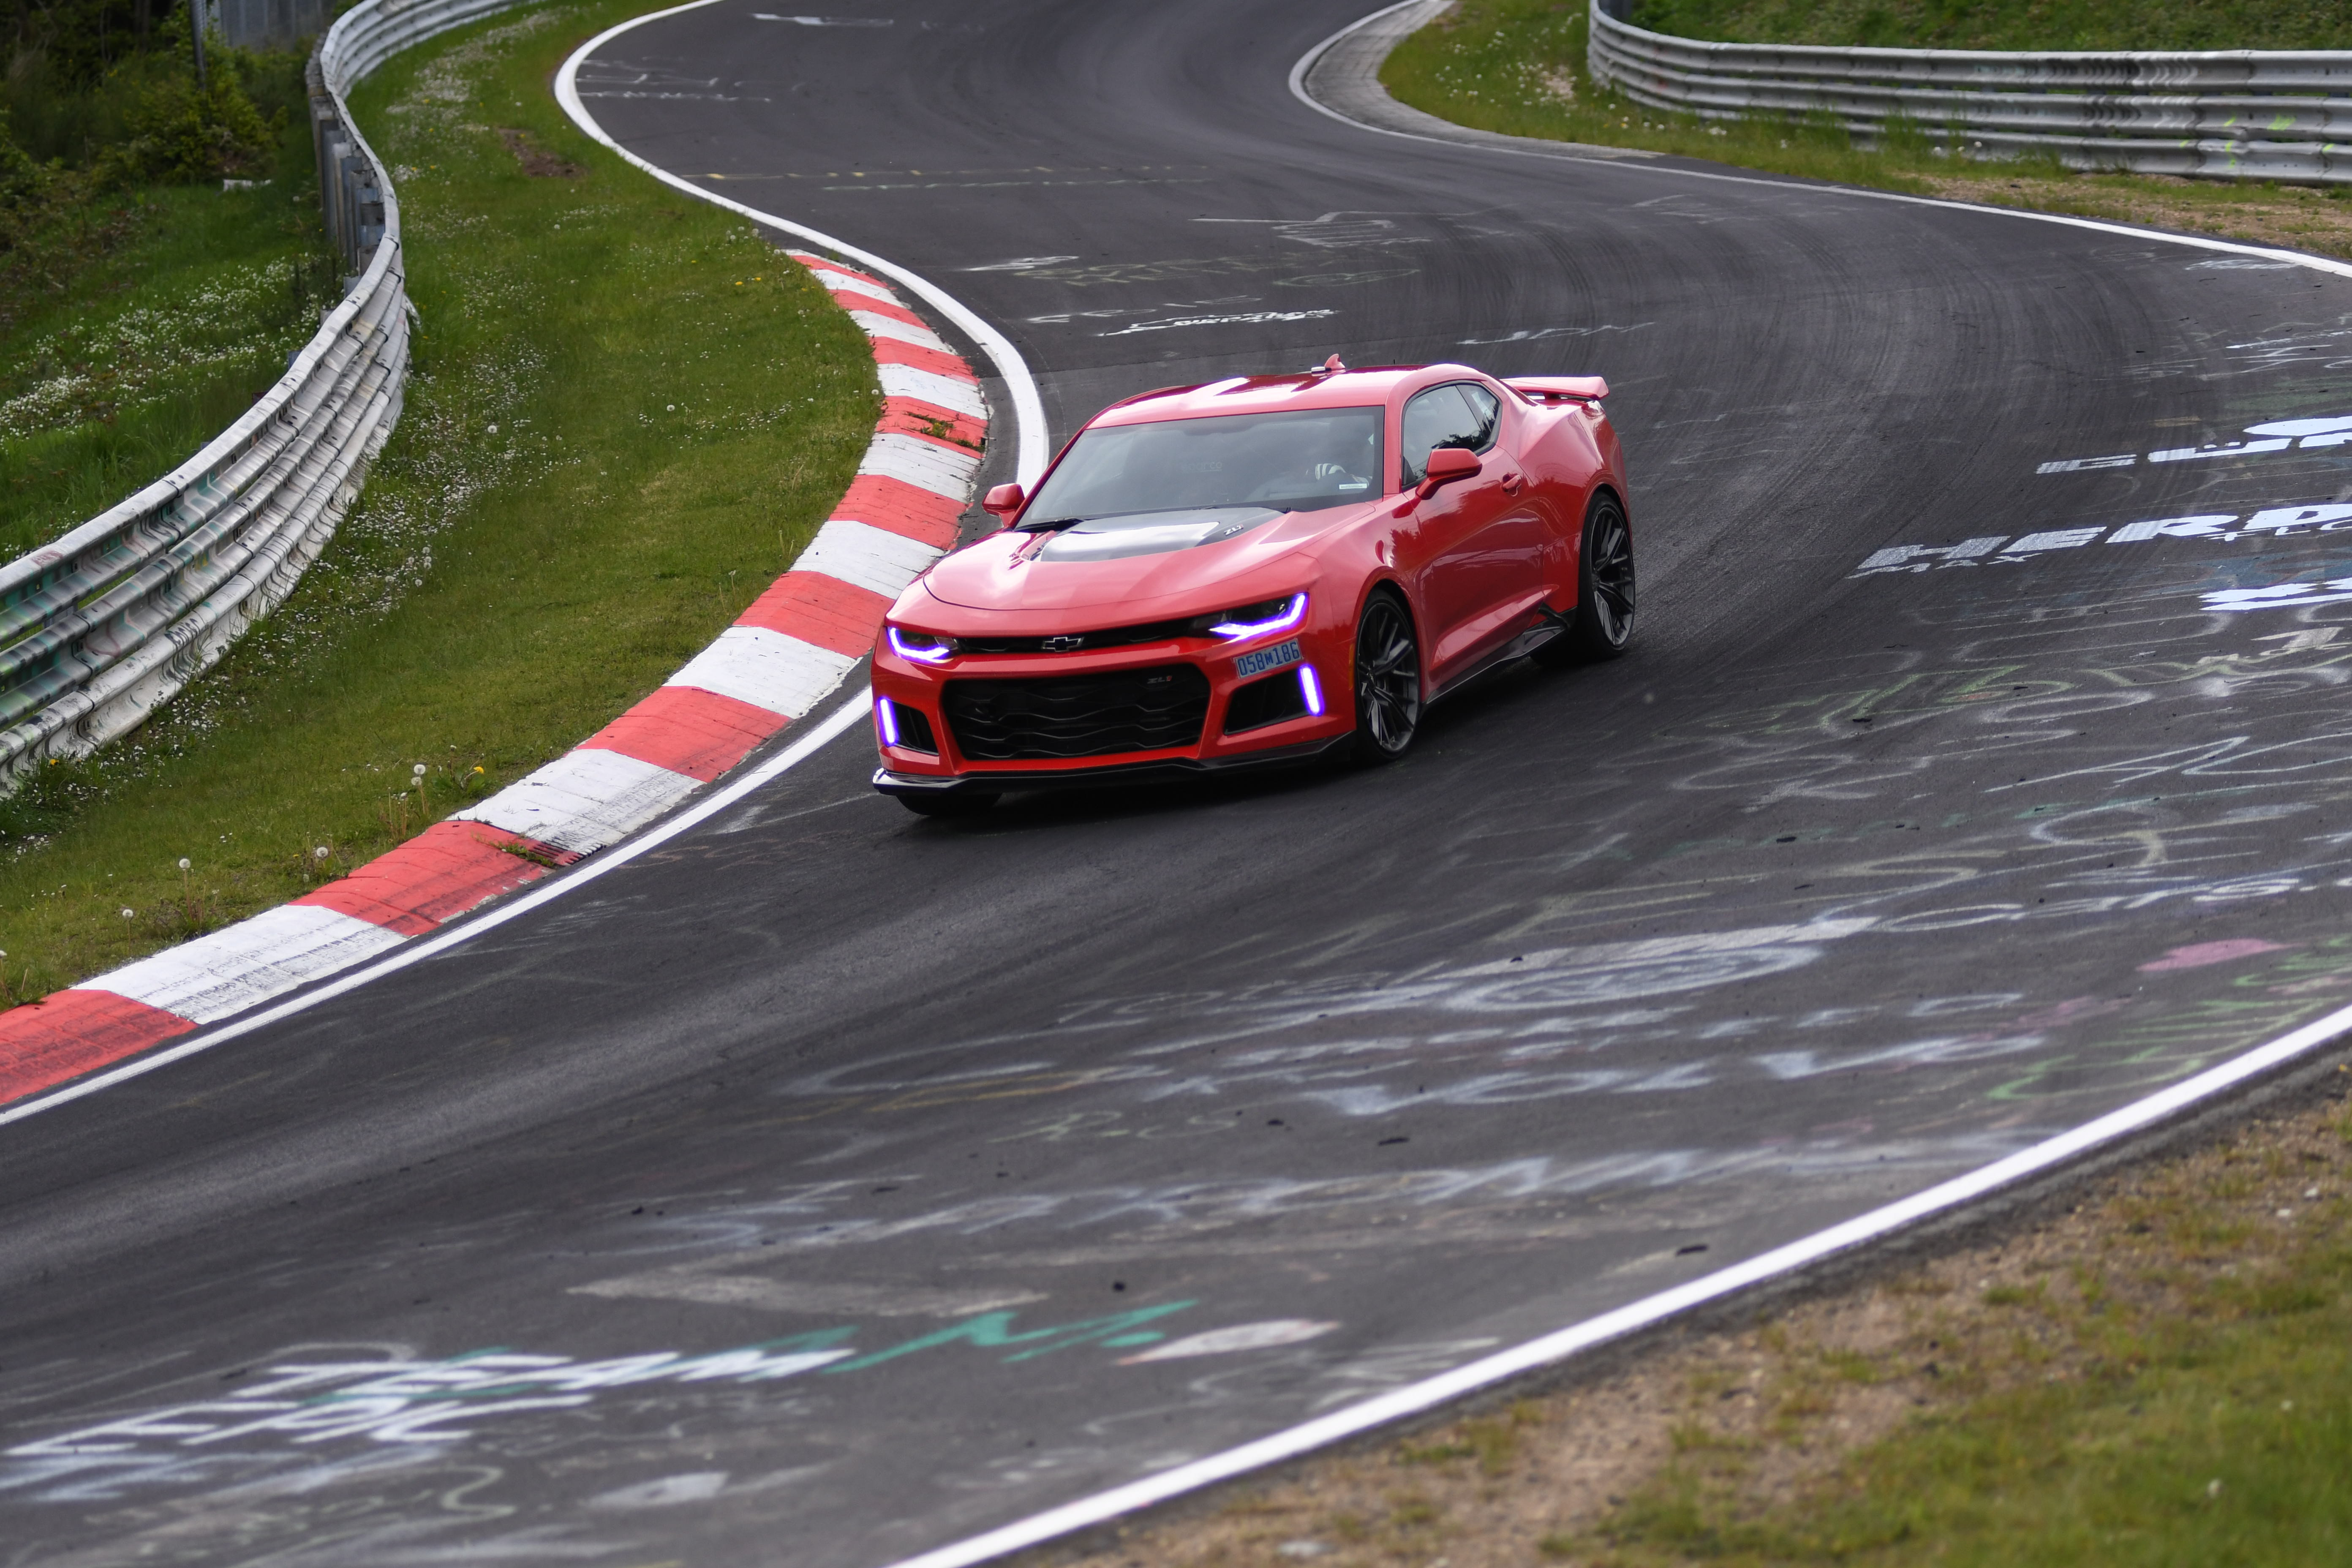 Chevrolet announced today that the 2017 Camaro ZL1 lapped Germany’s grueling Nürburgring Nordschleife road course in 7:29.60.